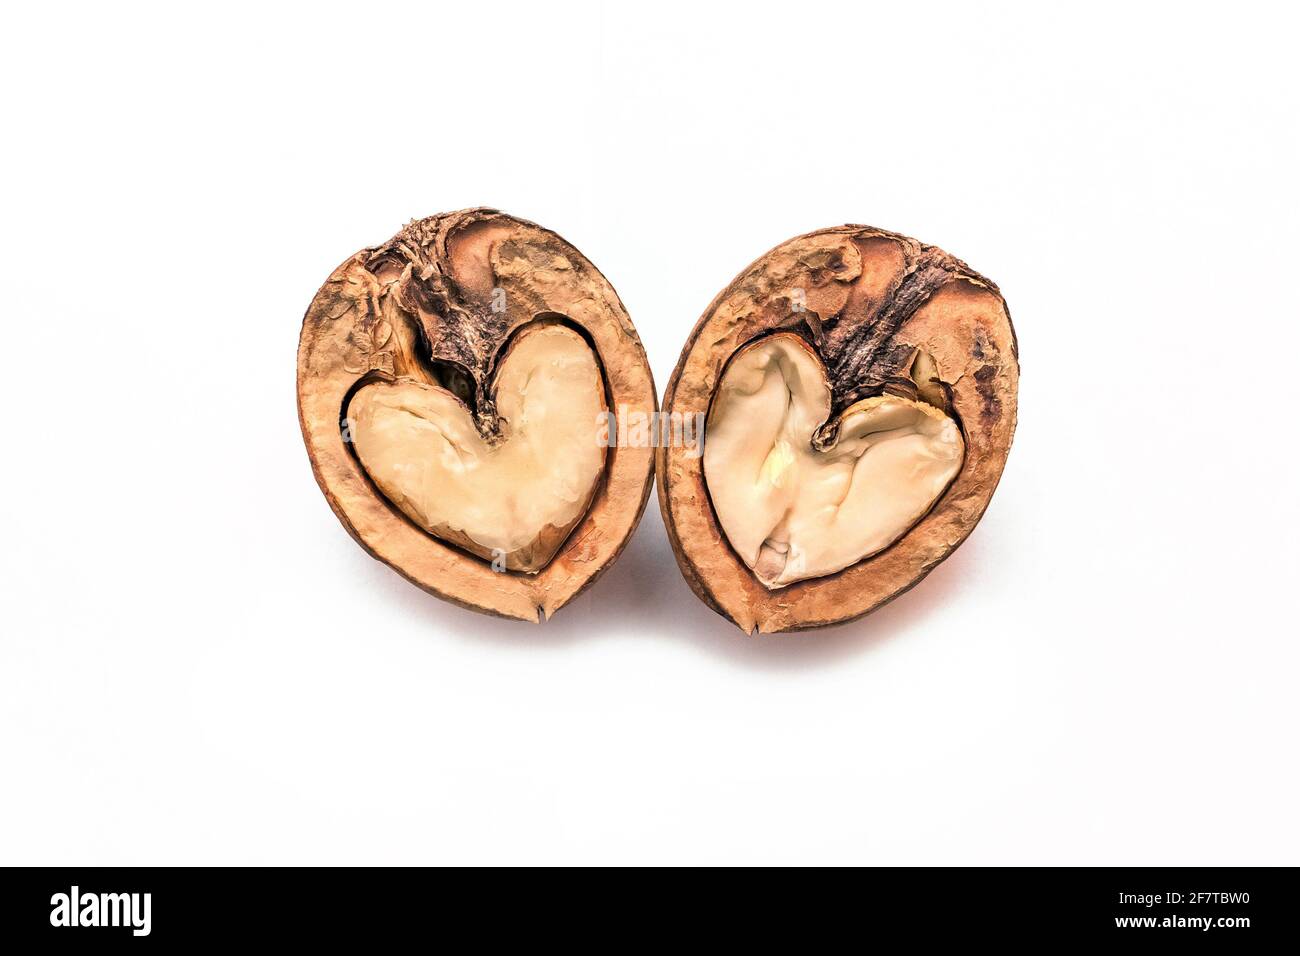 Halves of a walnut in the shape of a heart isolated on a white background. Stock Photo